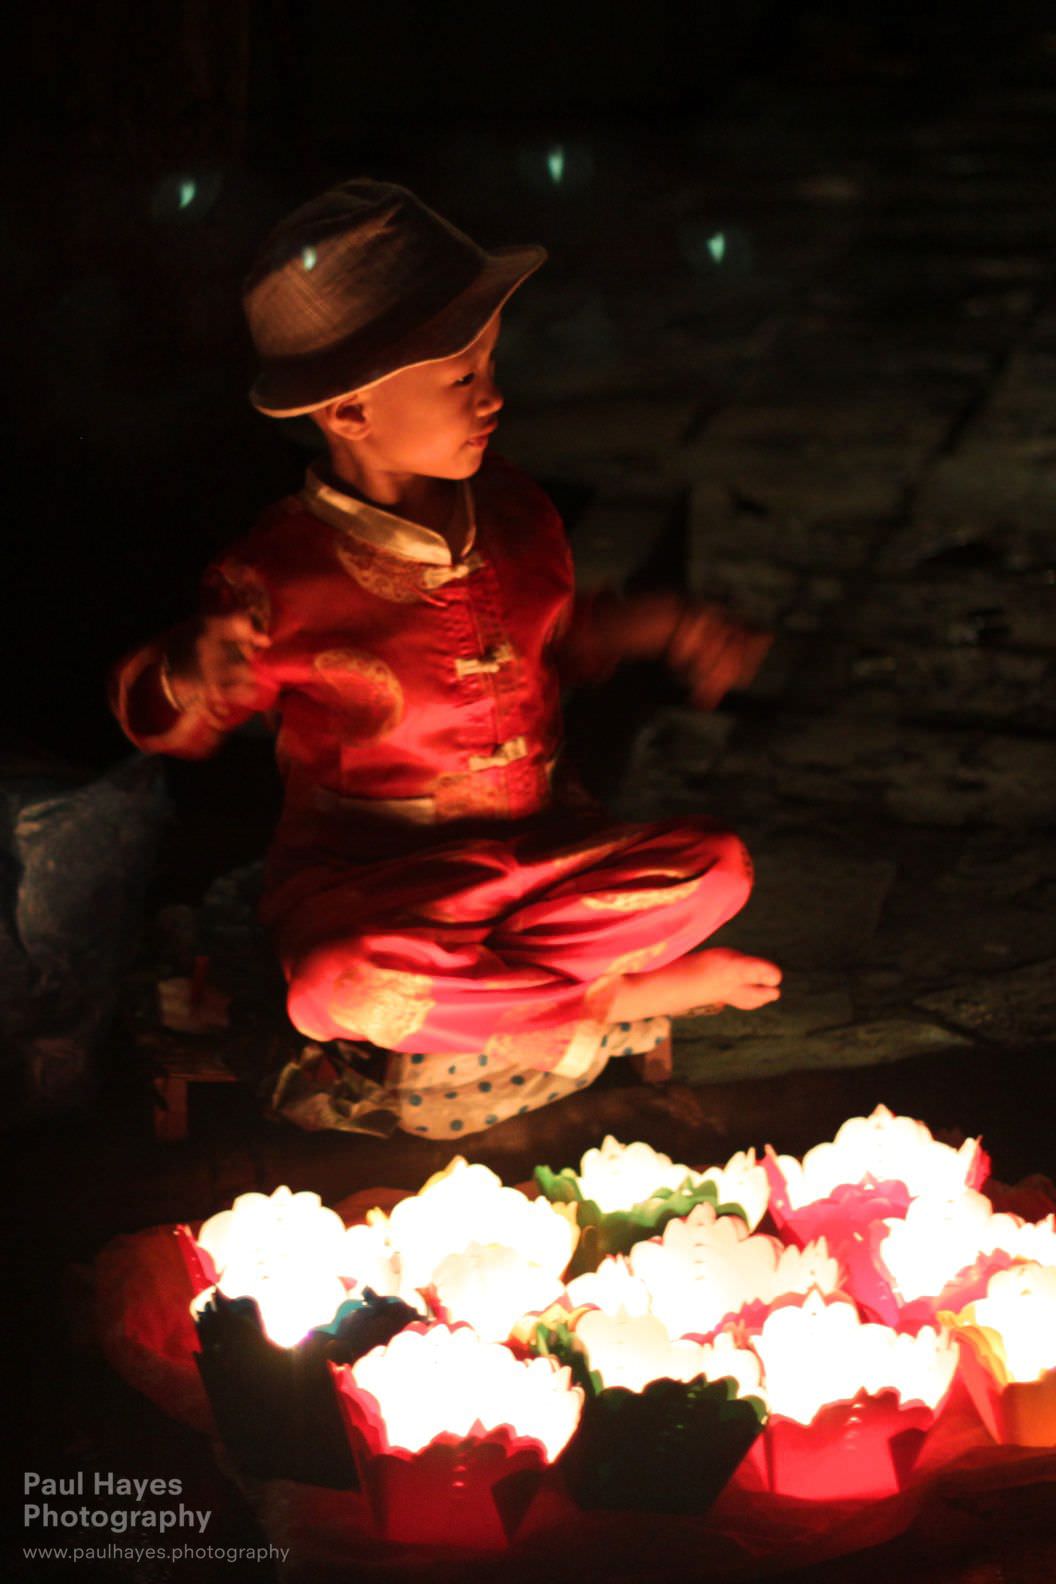 A child selling lanterns, sitting with the faeries